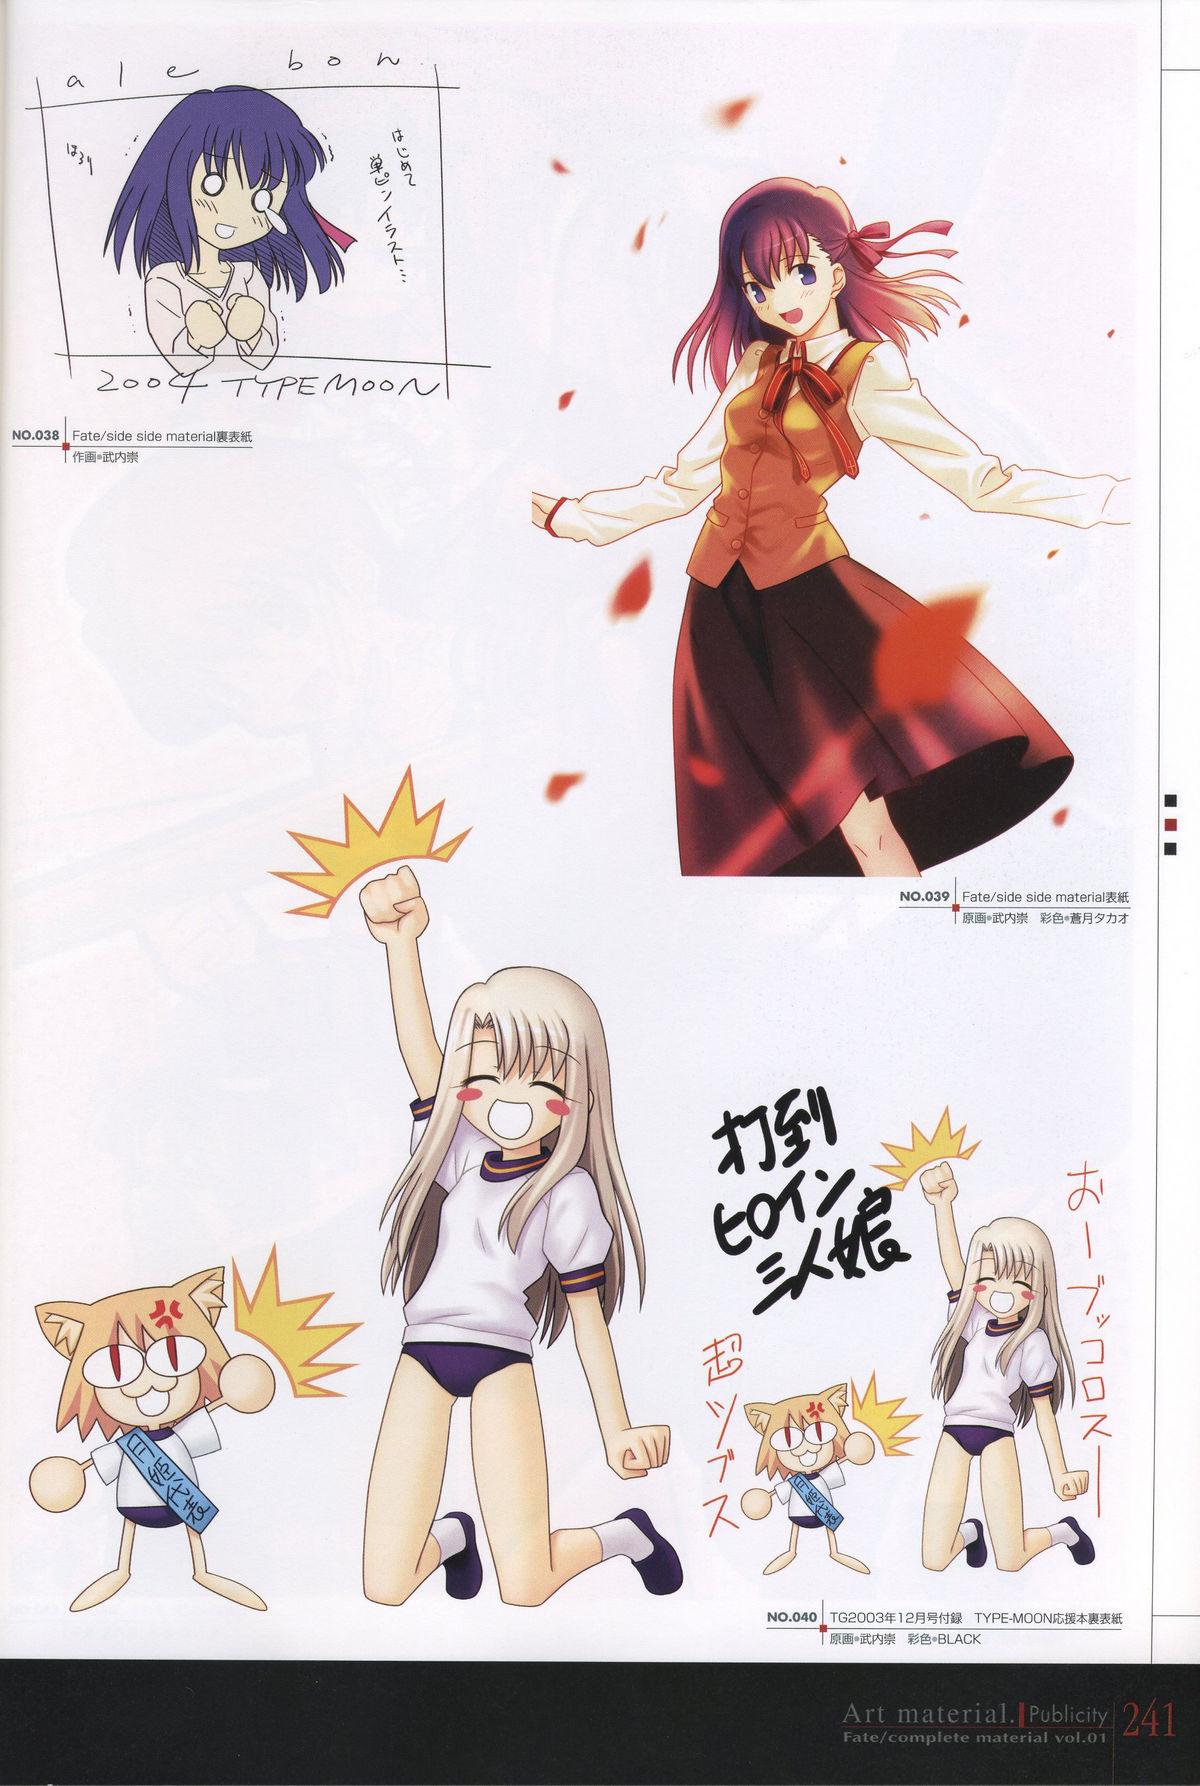 Fate/complete material I - Art material. 245